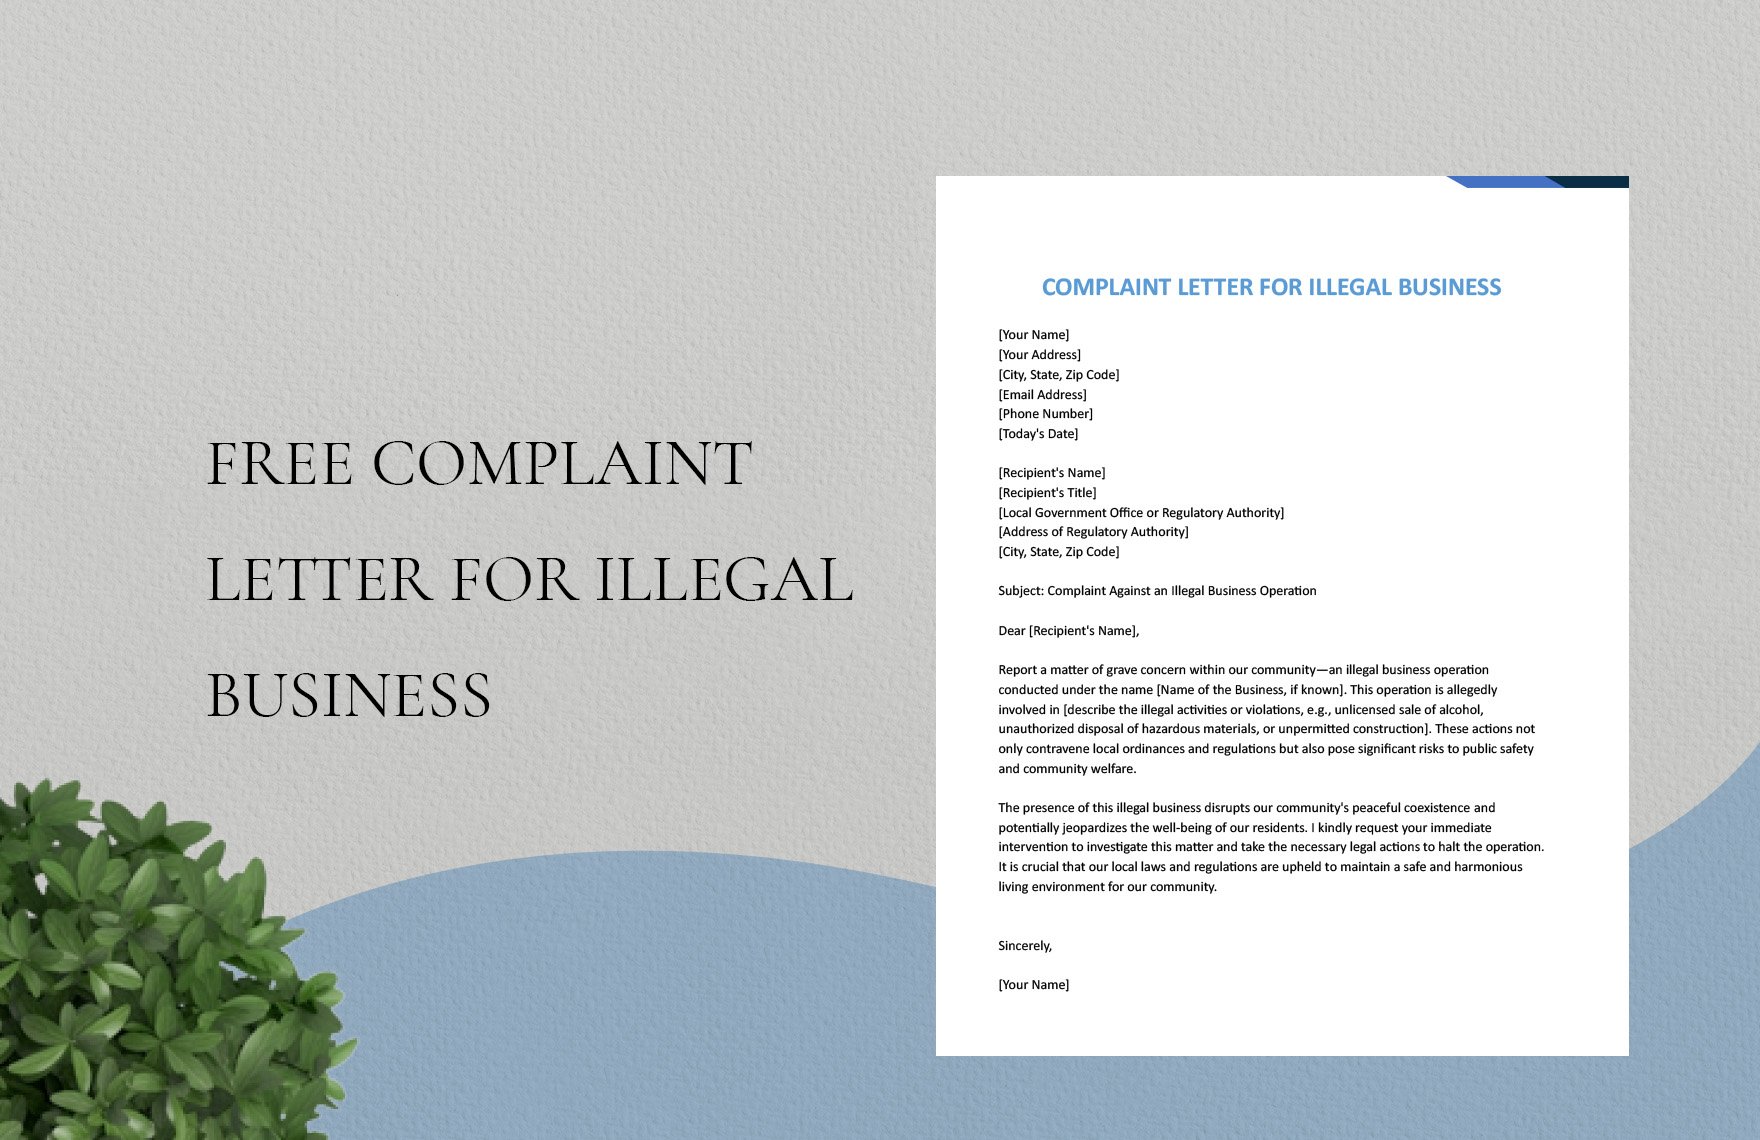 Free Complaint Letter For Illegal Business